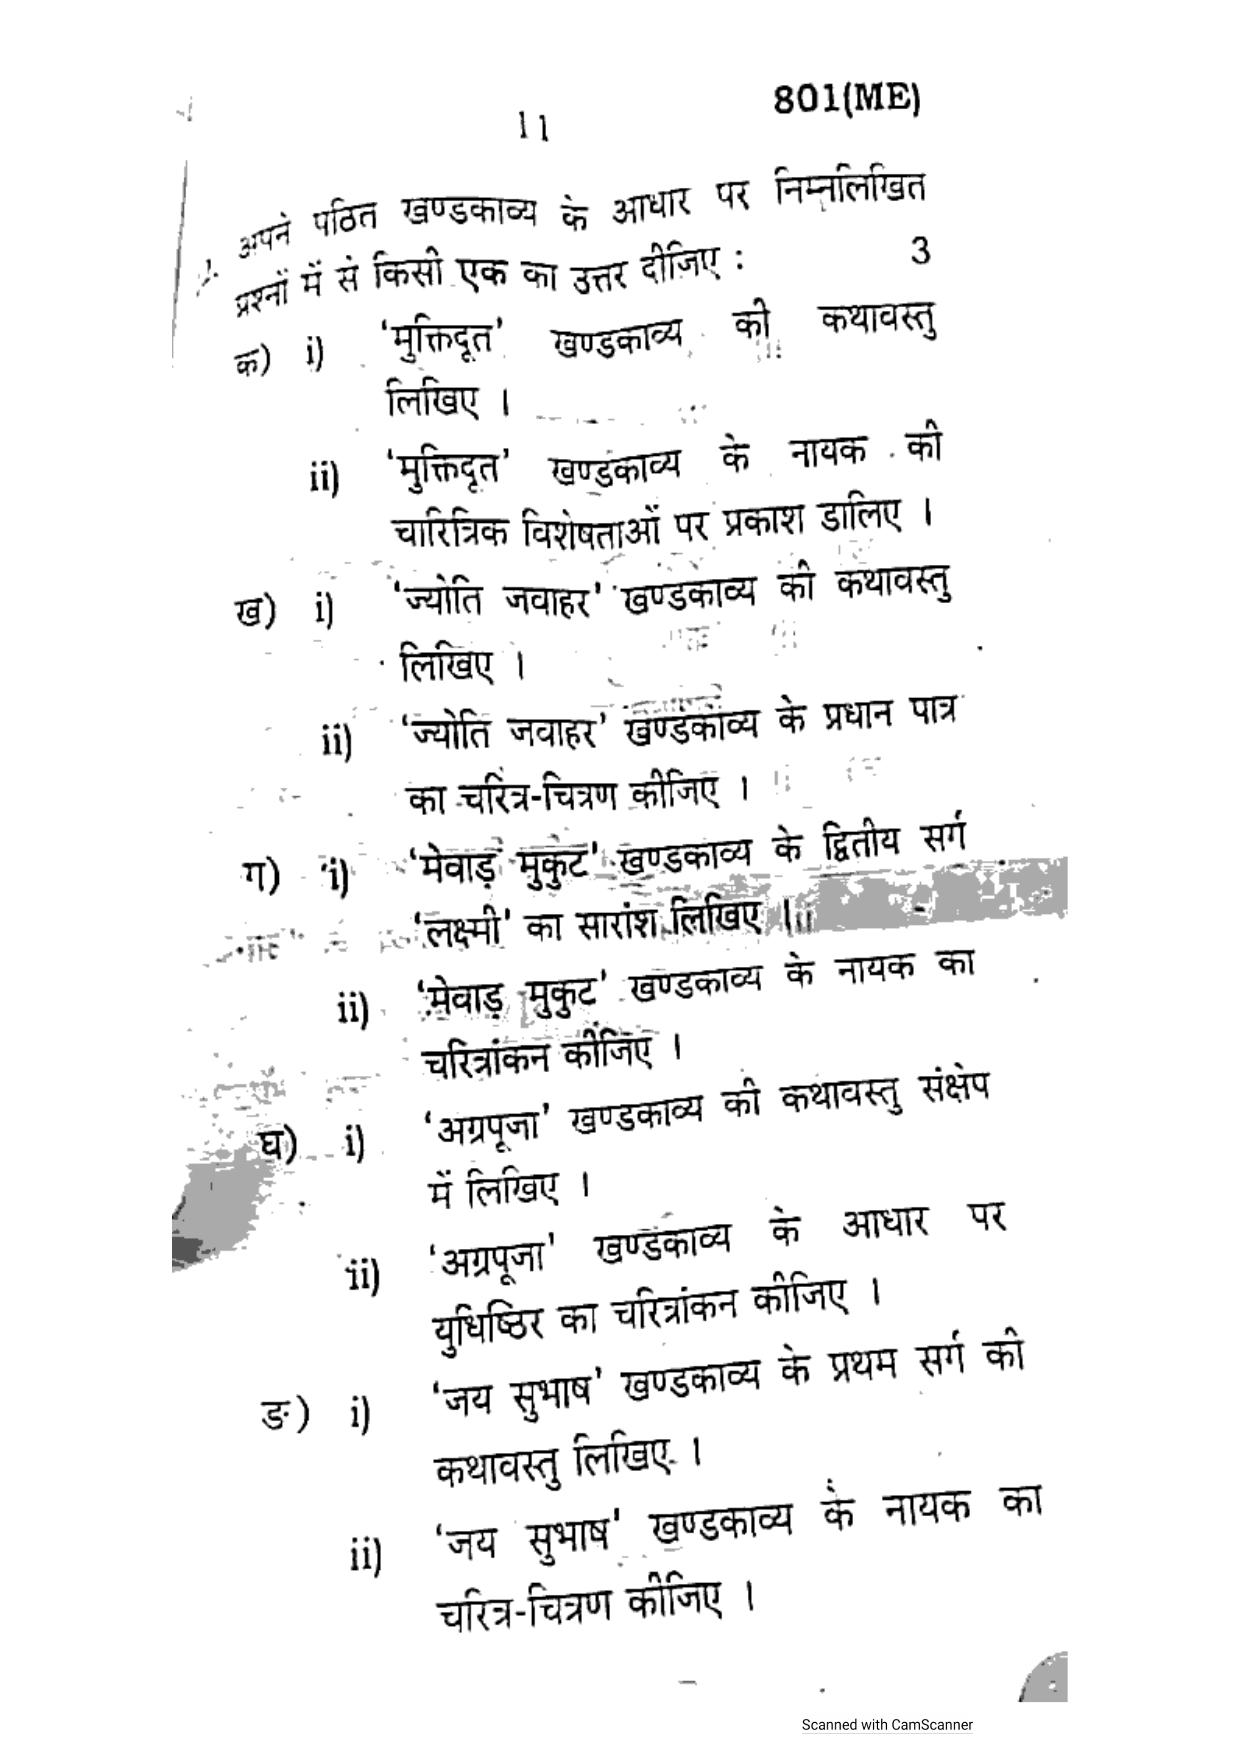 UP Board Previous Year Question Paper Class 10 Hindi (801 ME) – 2020 - Page 11